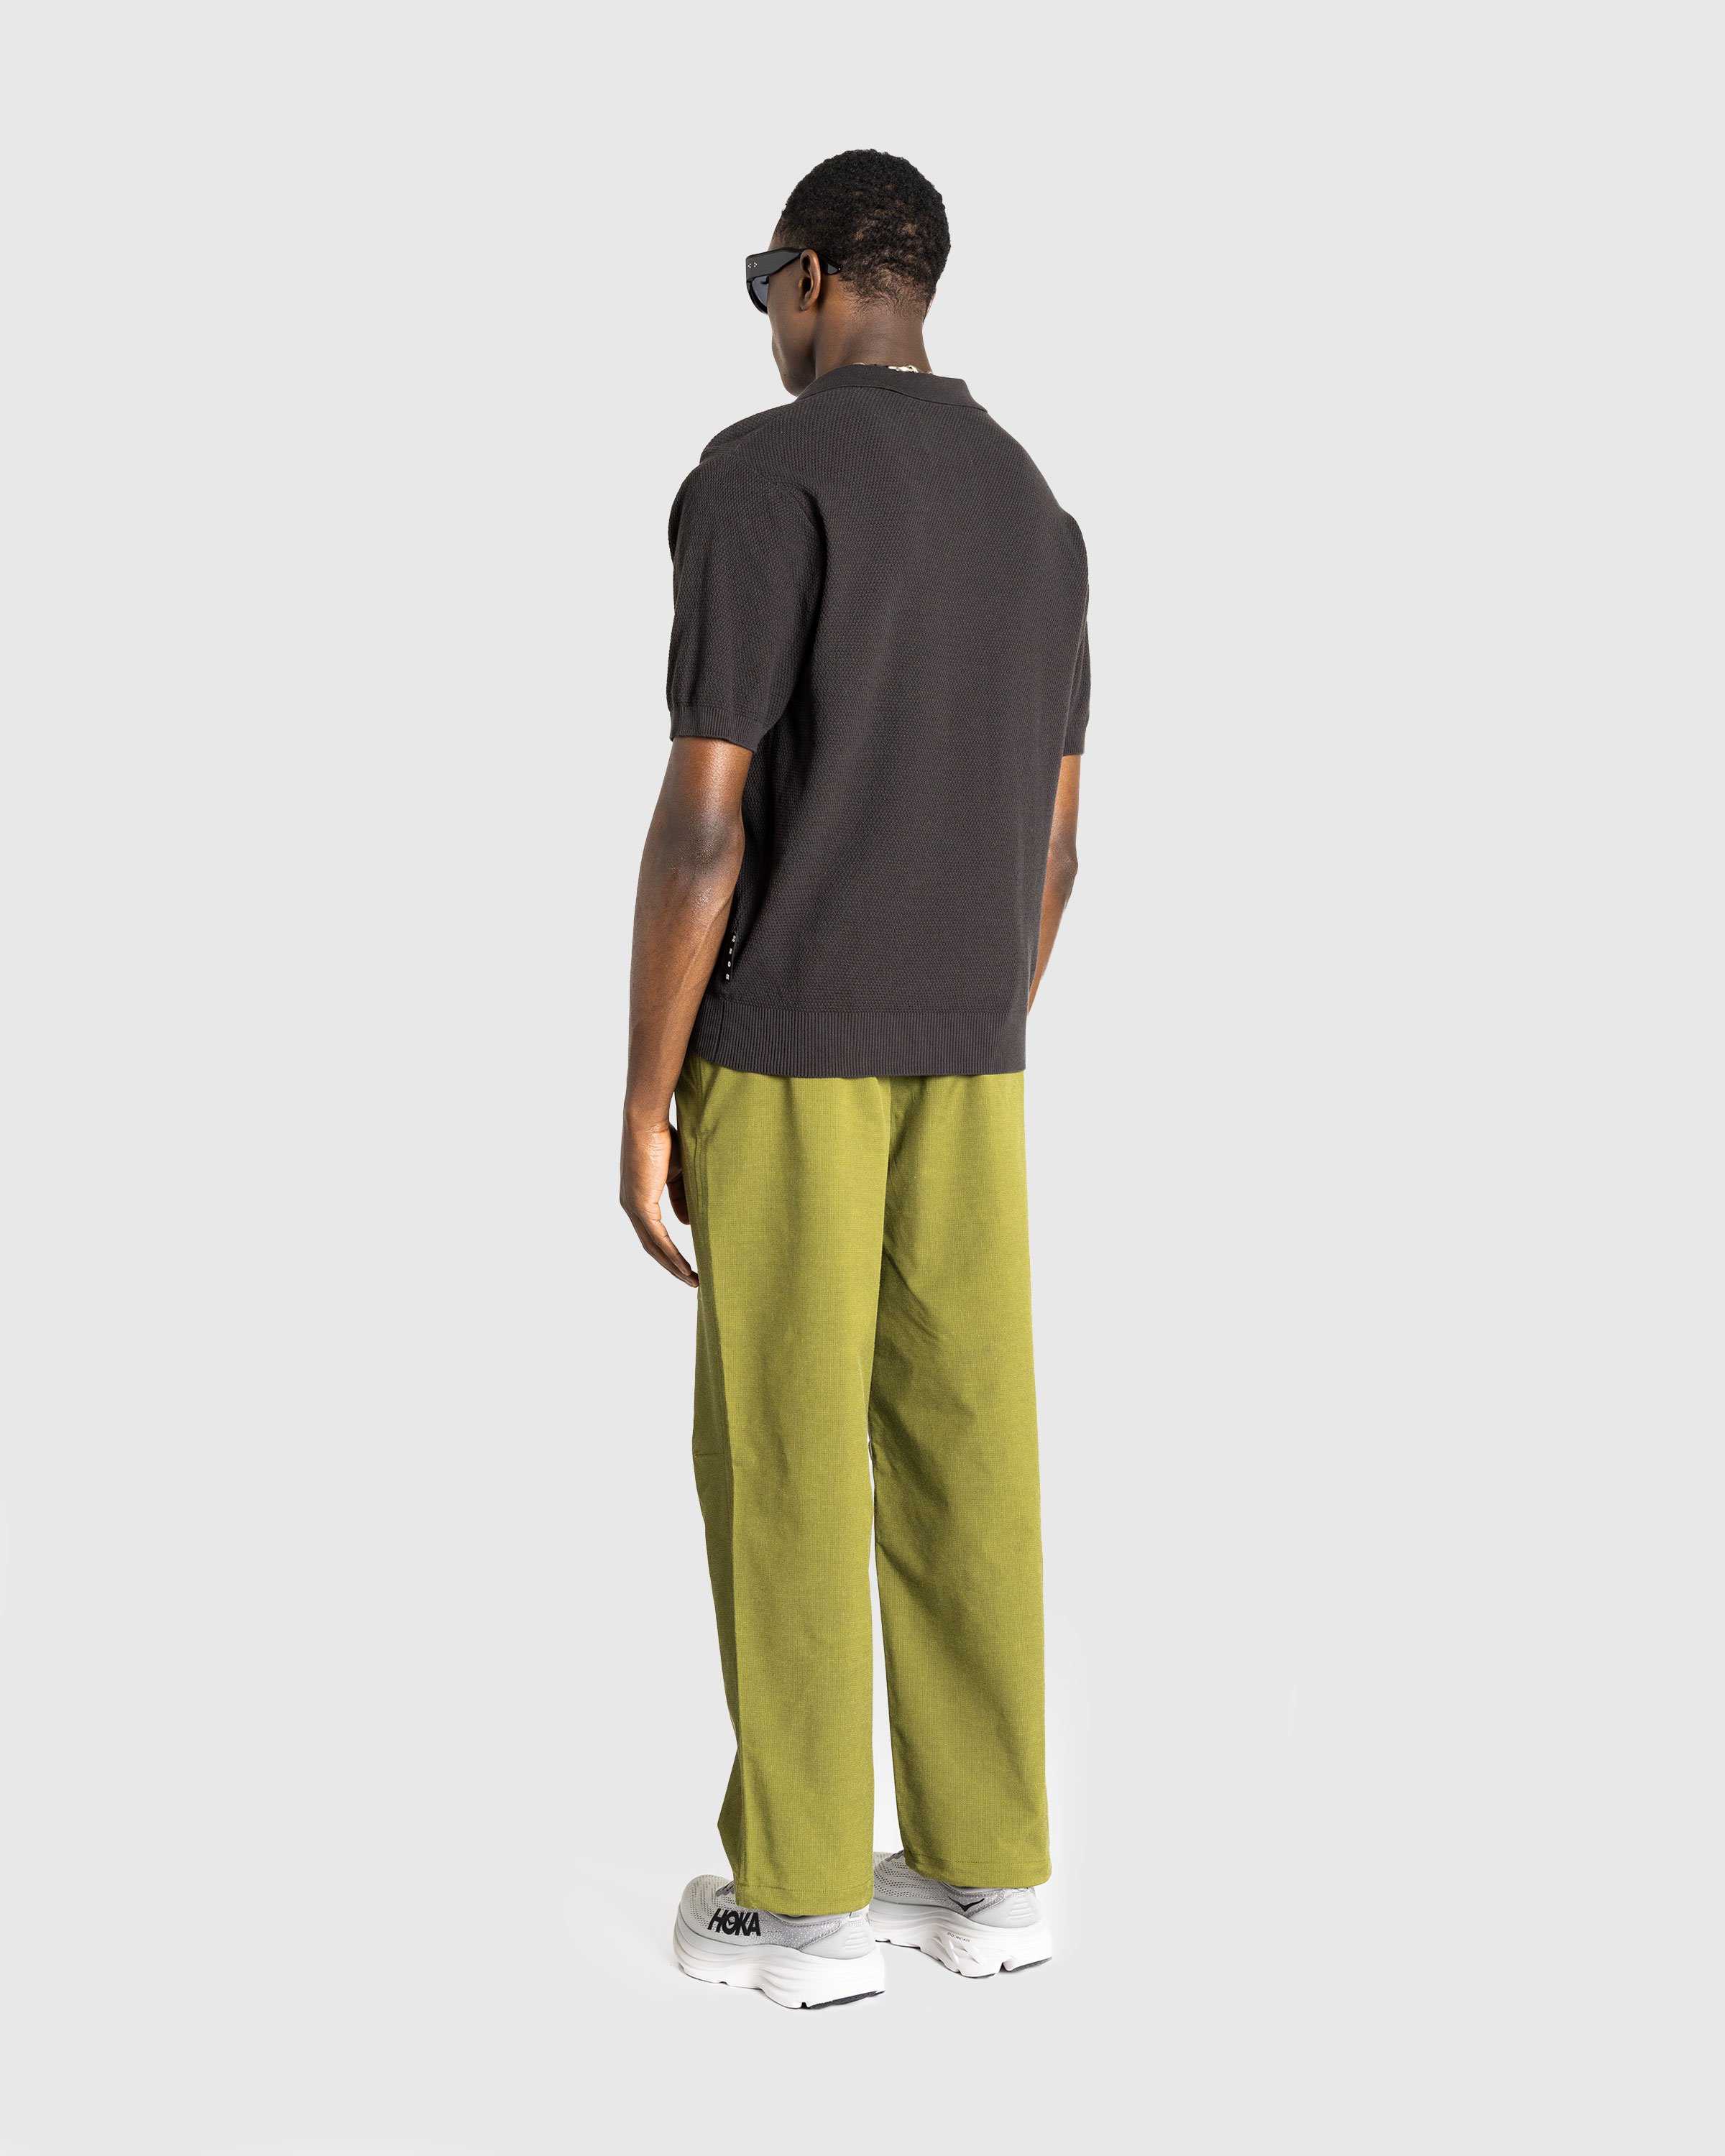 The North Face - M M66 TEK TWILL WIDE LEG PANT FOREST OLIVE - Clothing - Green - Image 4